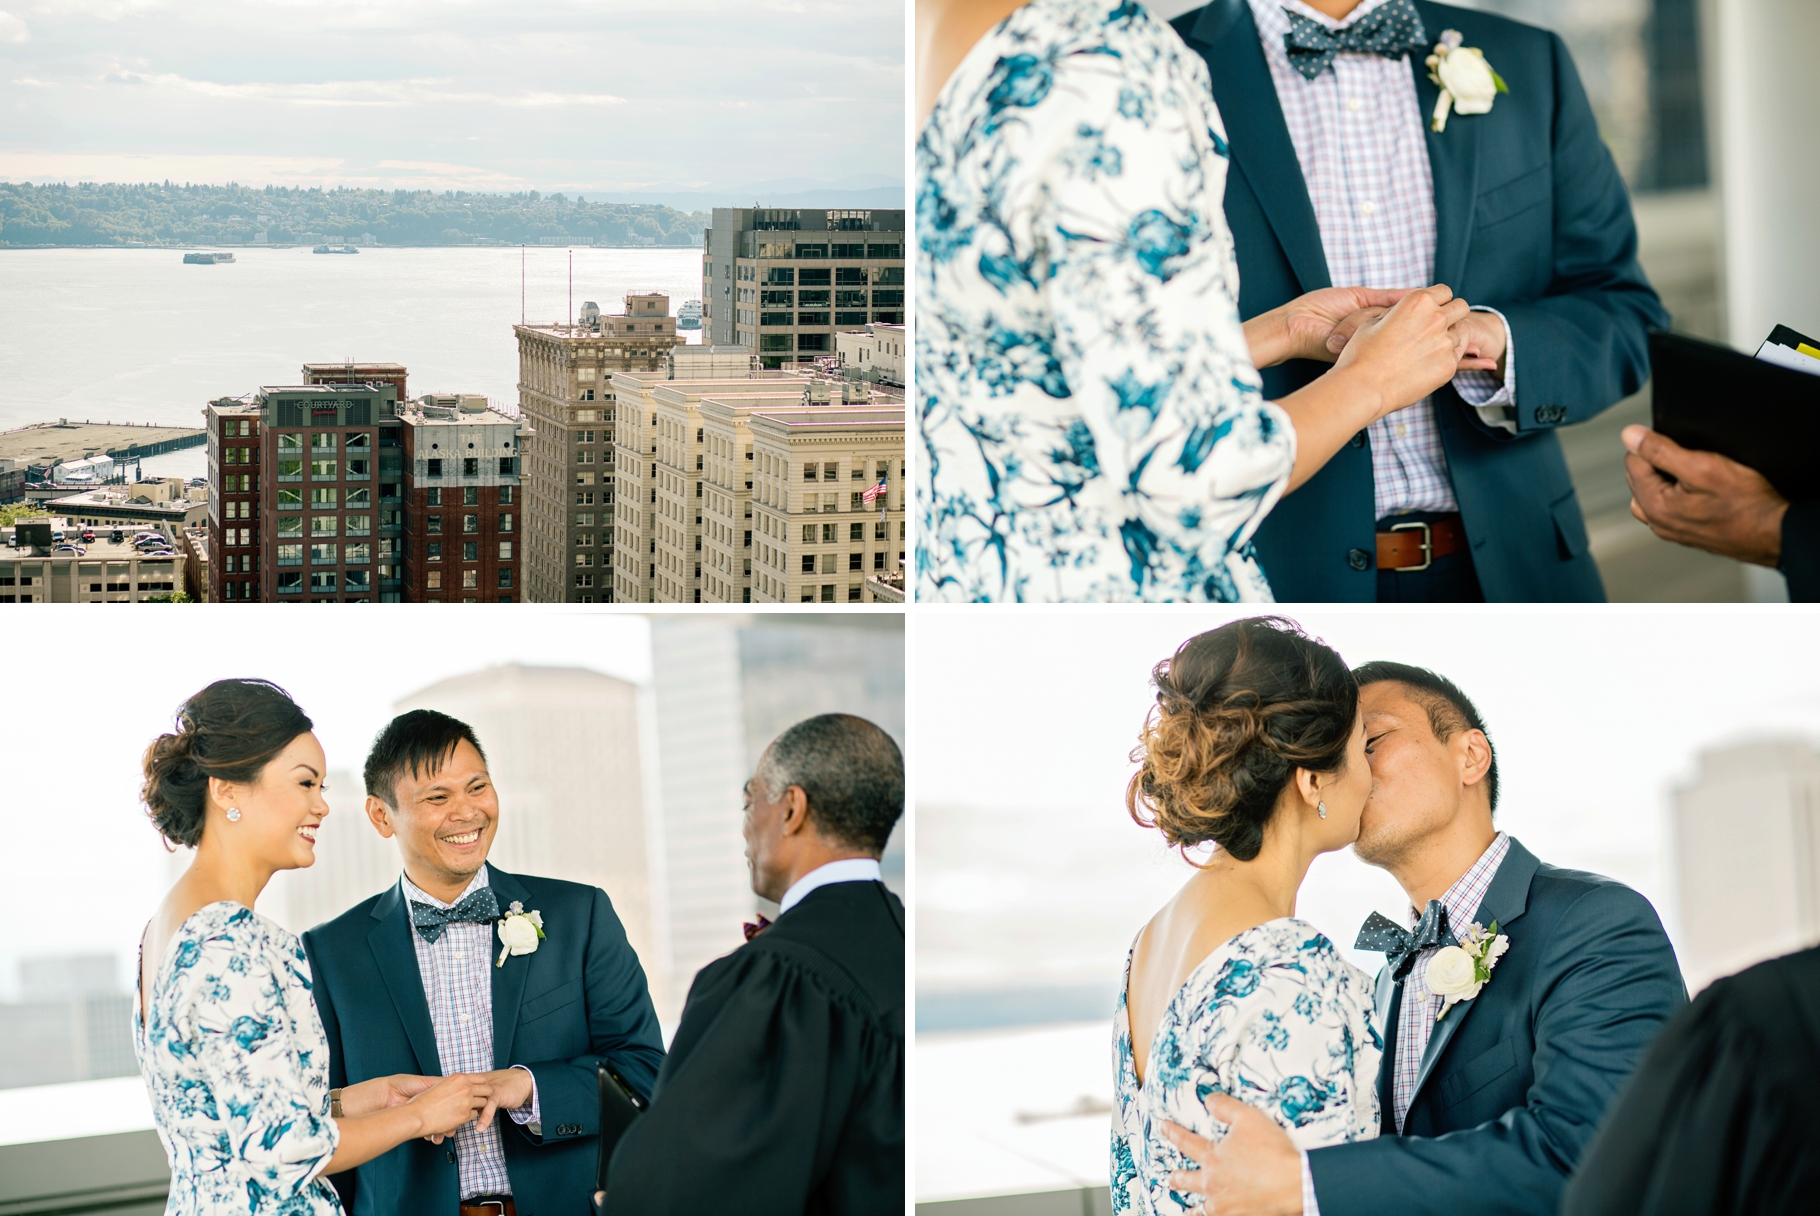 19-Court-House-Rooftop-Ceremony-Municipal-Court-of-Seattle-Wedding-Day-Photographer-Photography-by-Betty-Elaine